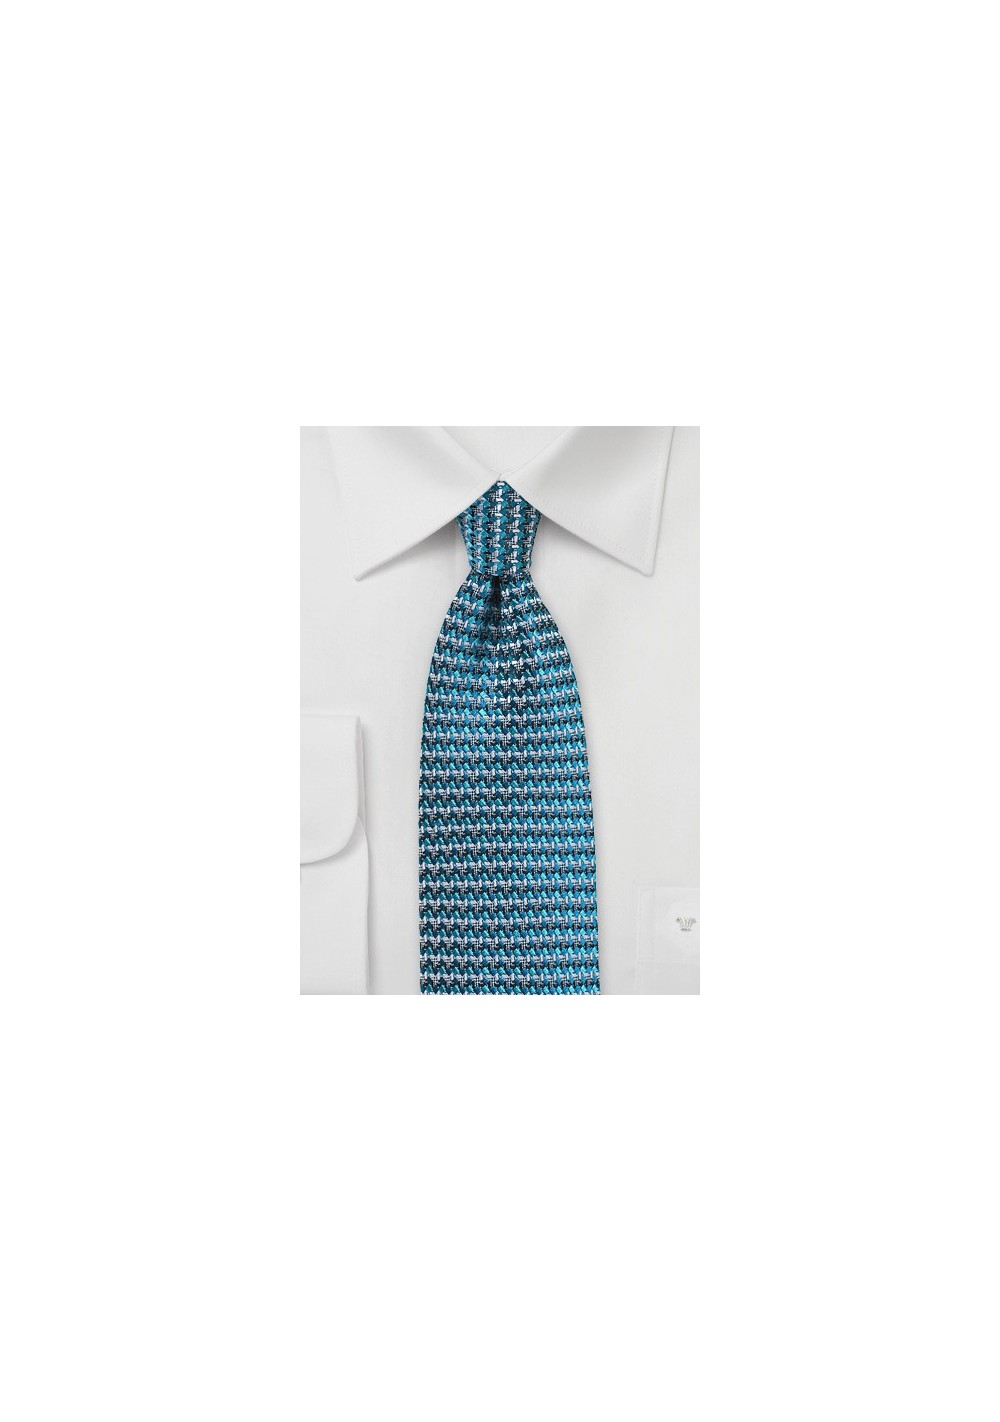 Retro Weave Silk Tie in Teal and Silver